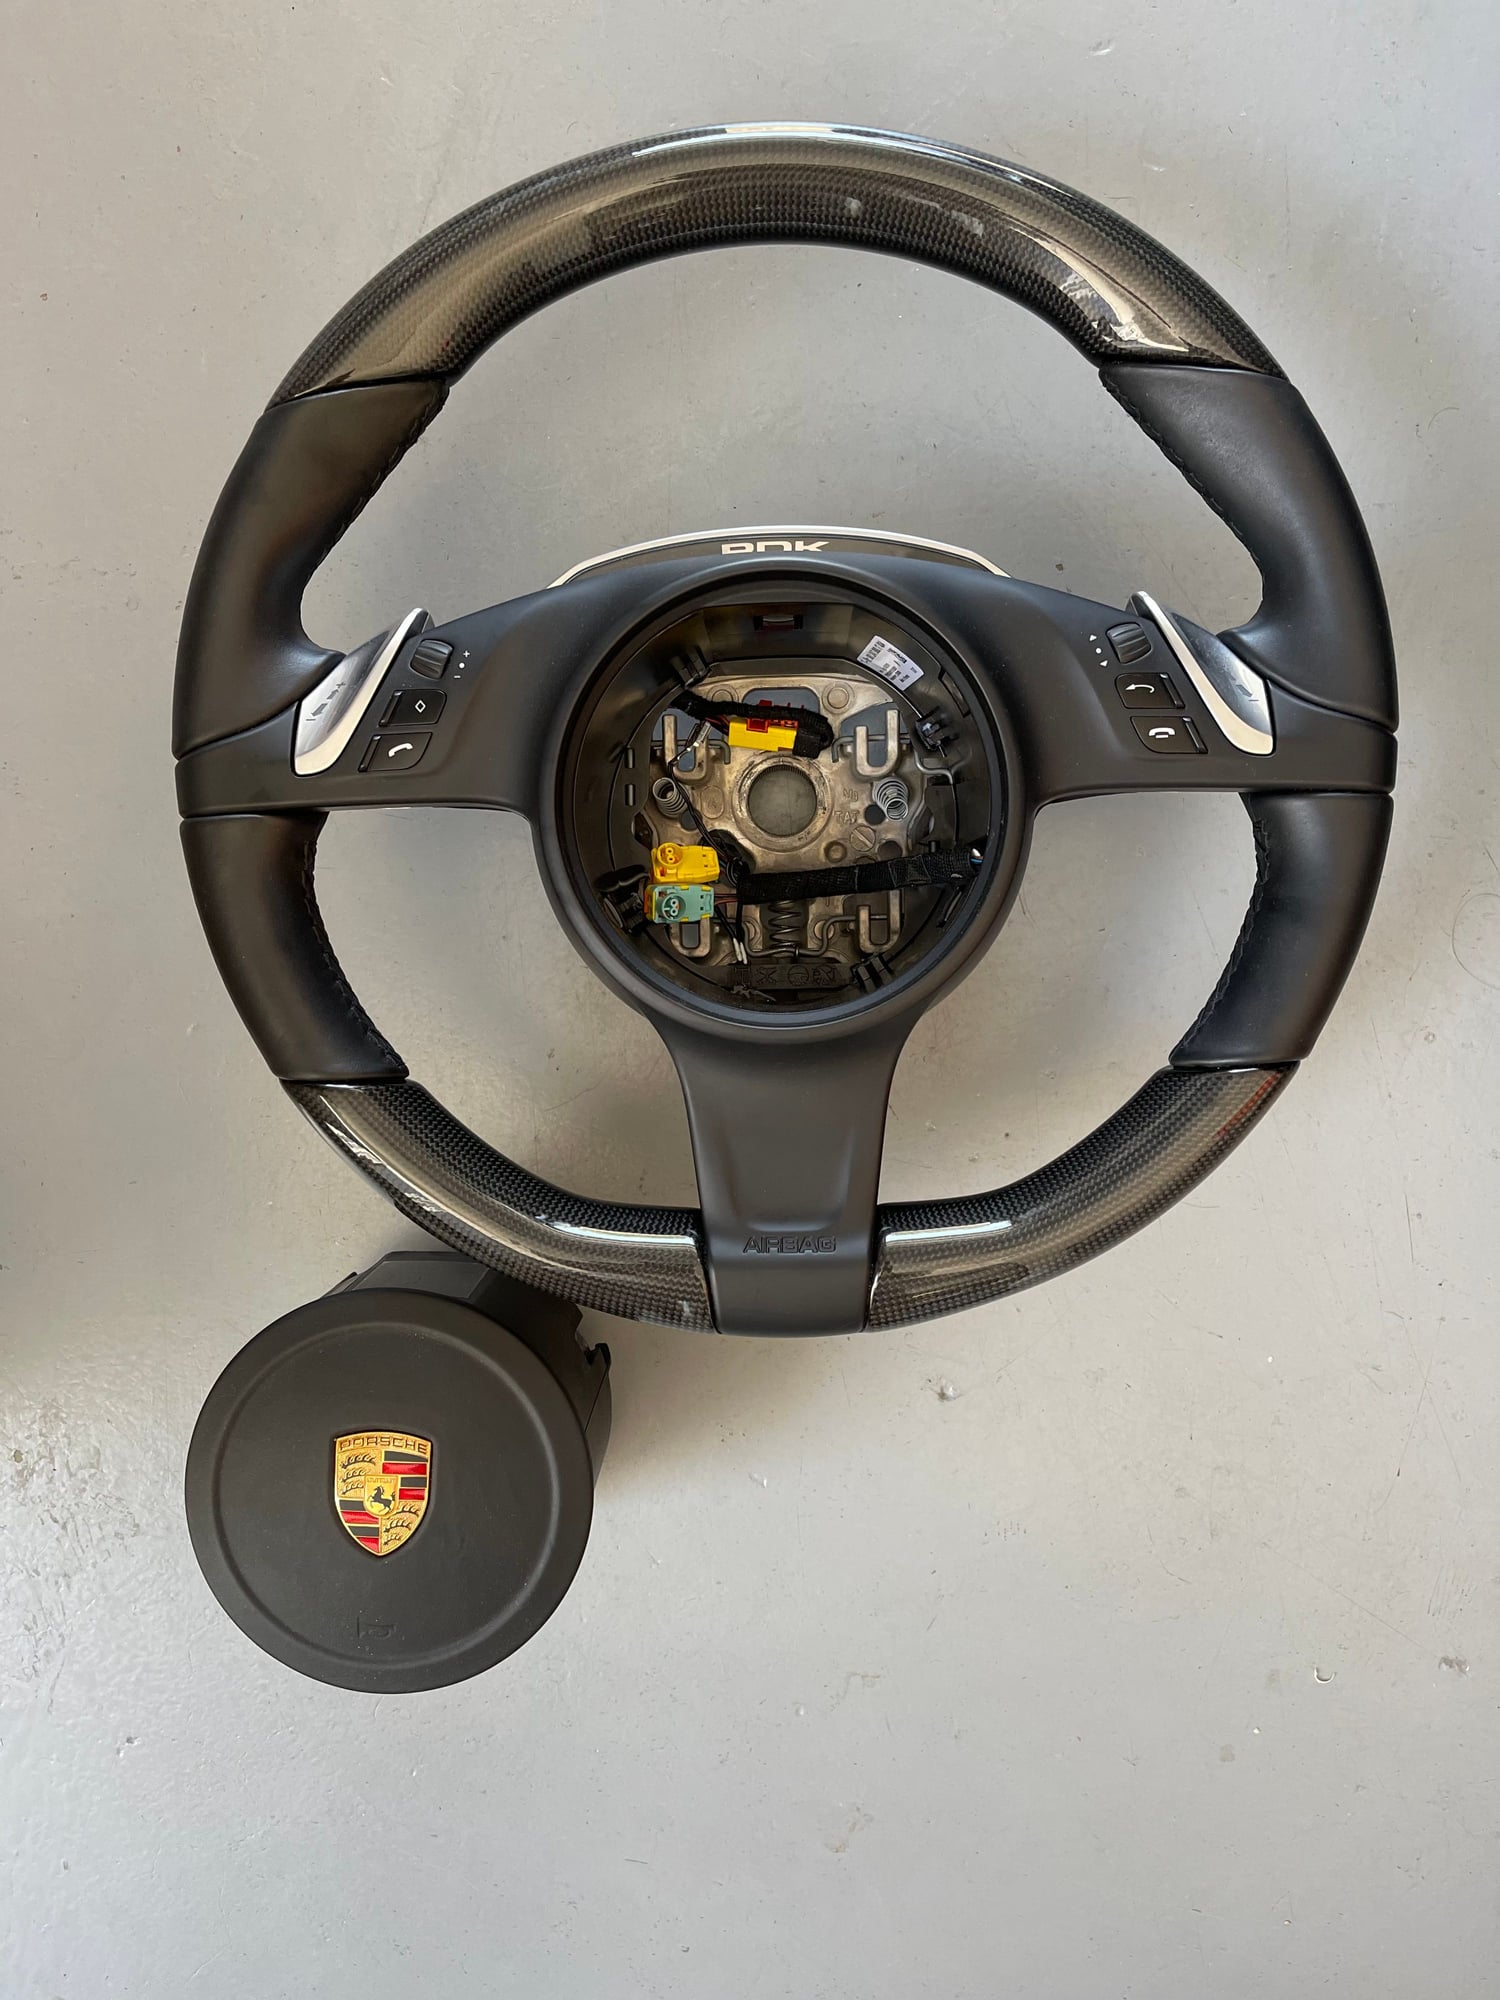 Interior/Upholstery - Carbon Fiber PDK Steering Wheel with Air Bag - Used - 2015 Porsche 911 - Los Angeles, CA 91403, United States